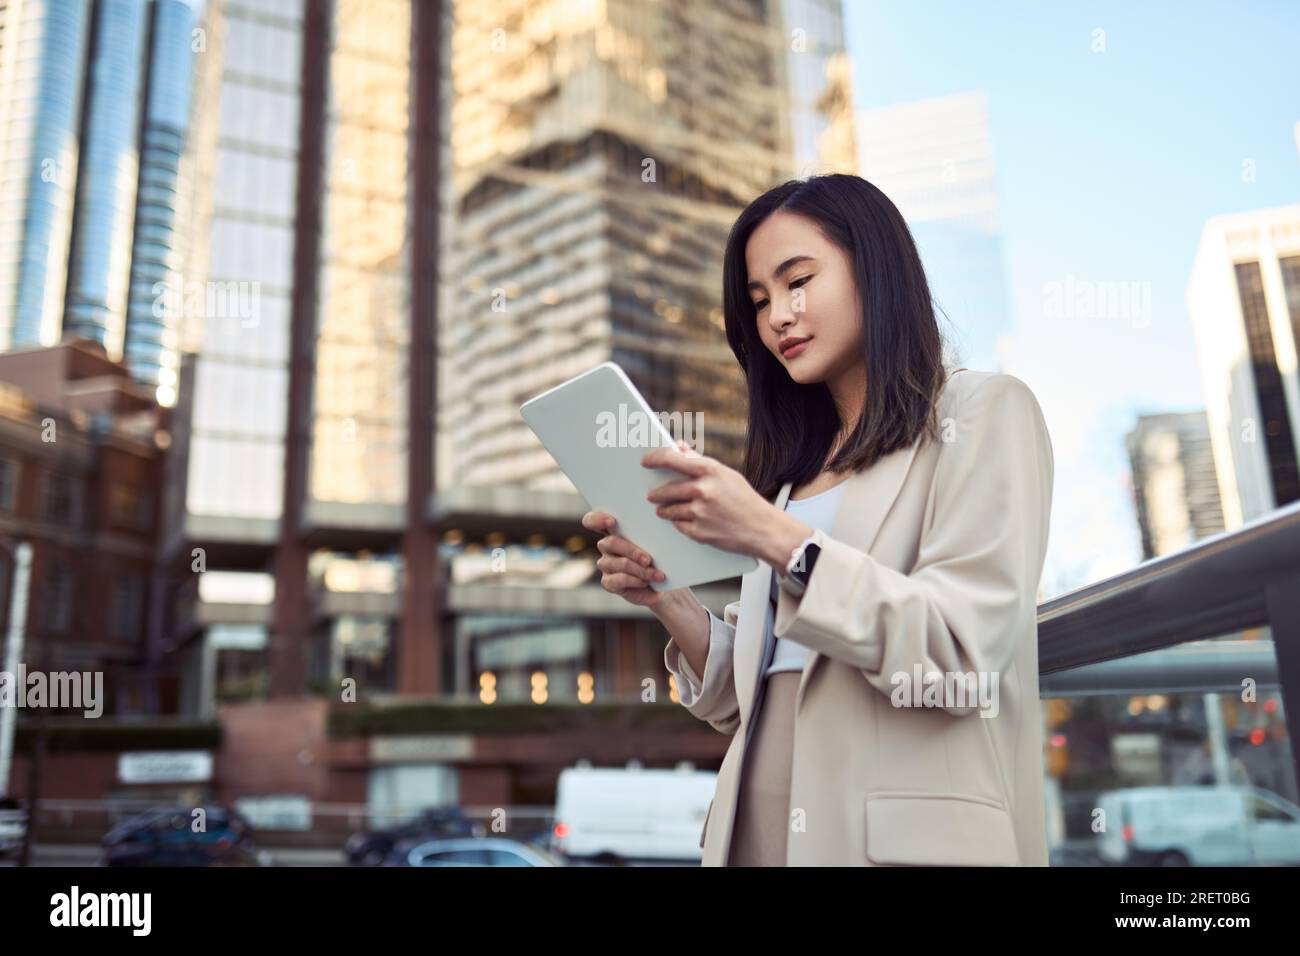 Young Asian business woman professional standing in city using digital tablet. Stock Photo